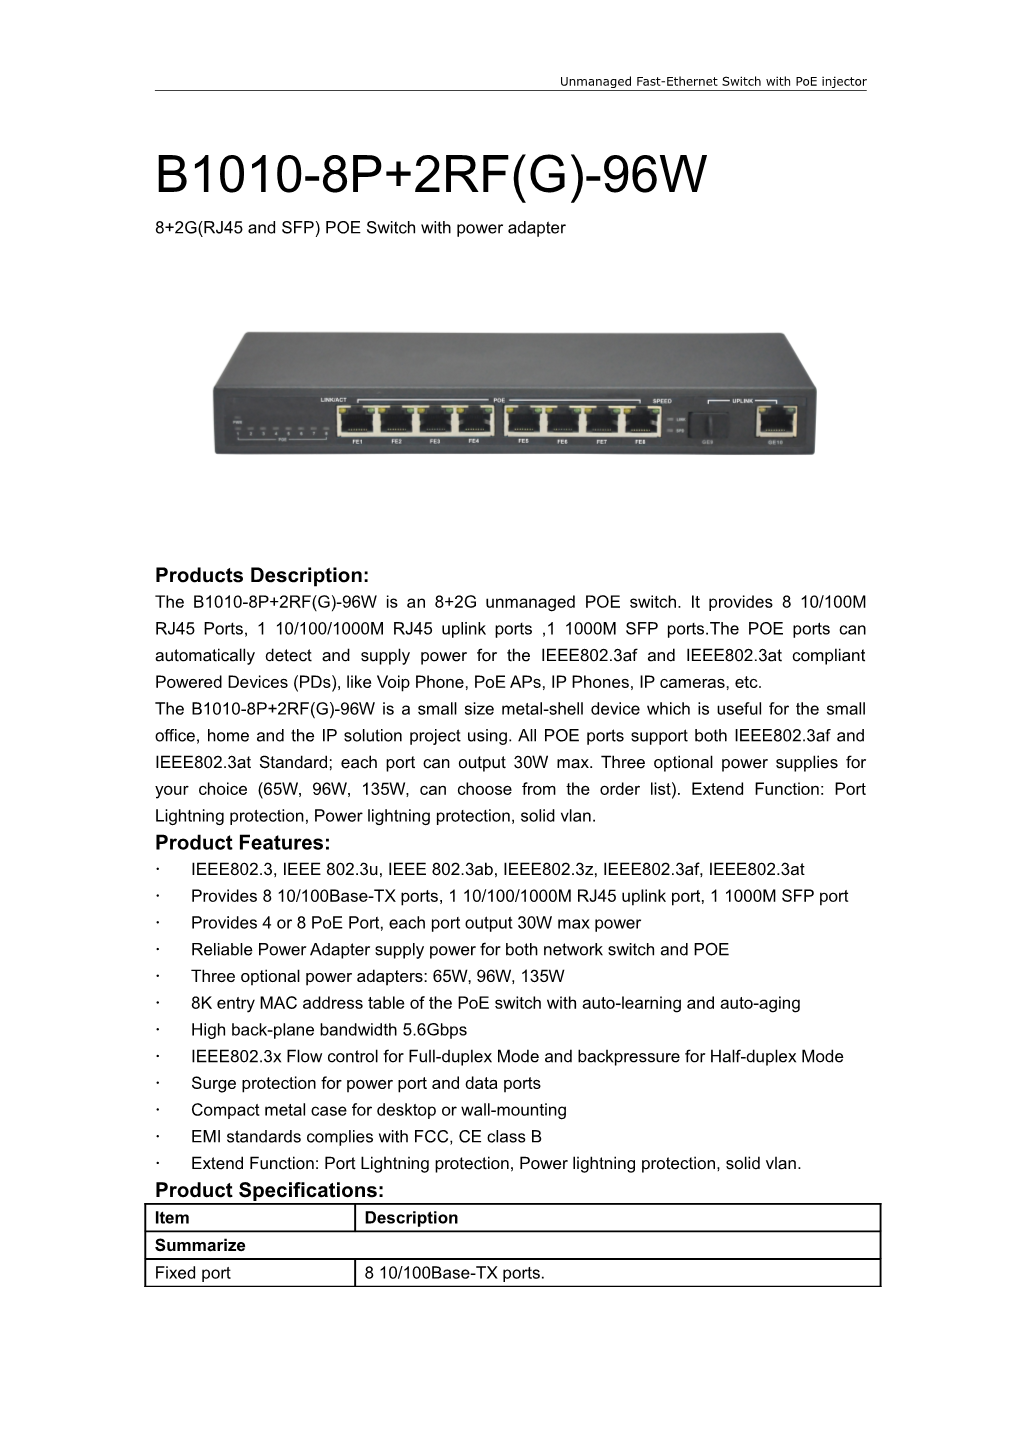 Unmanaged Fast-Ethernet Switch with Poe Injector